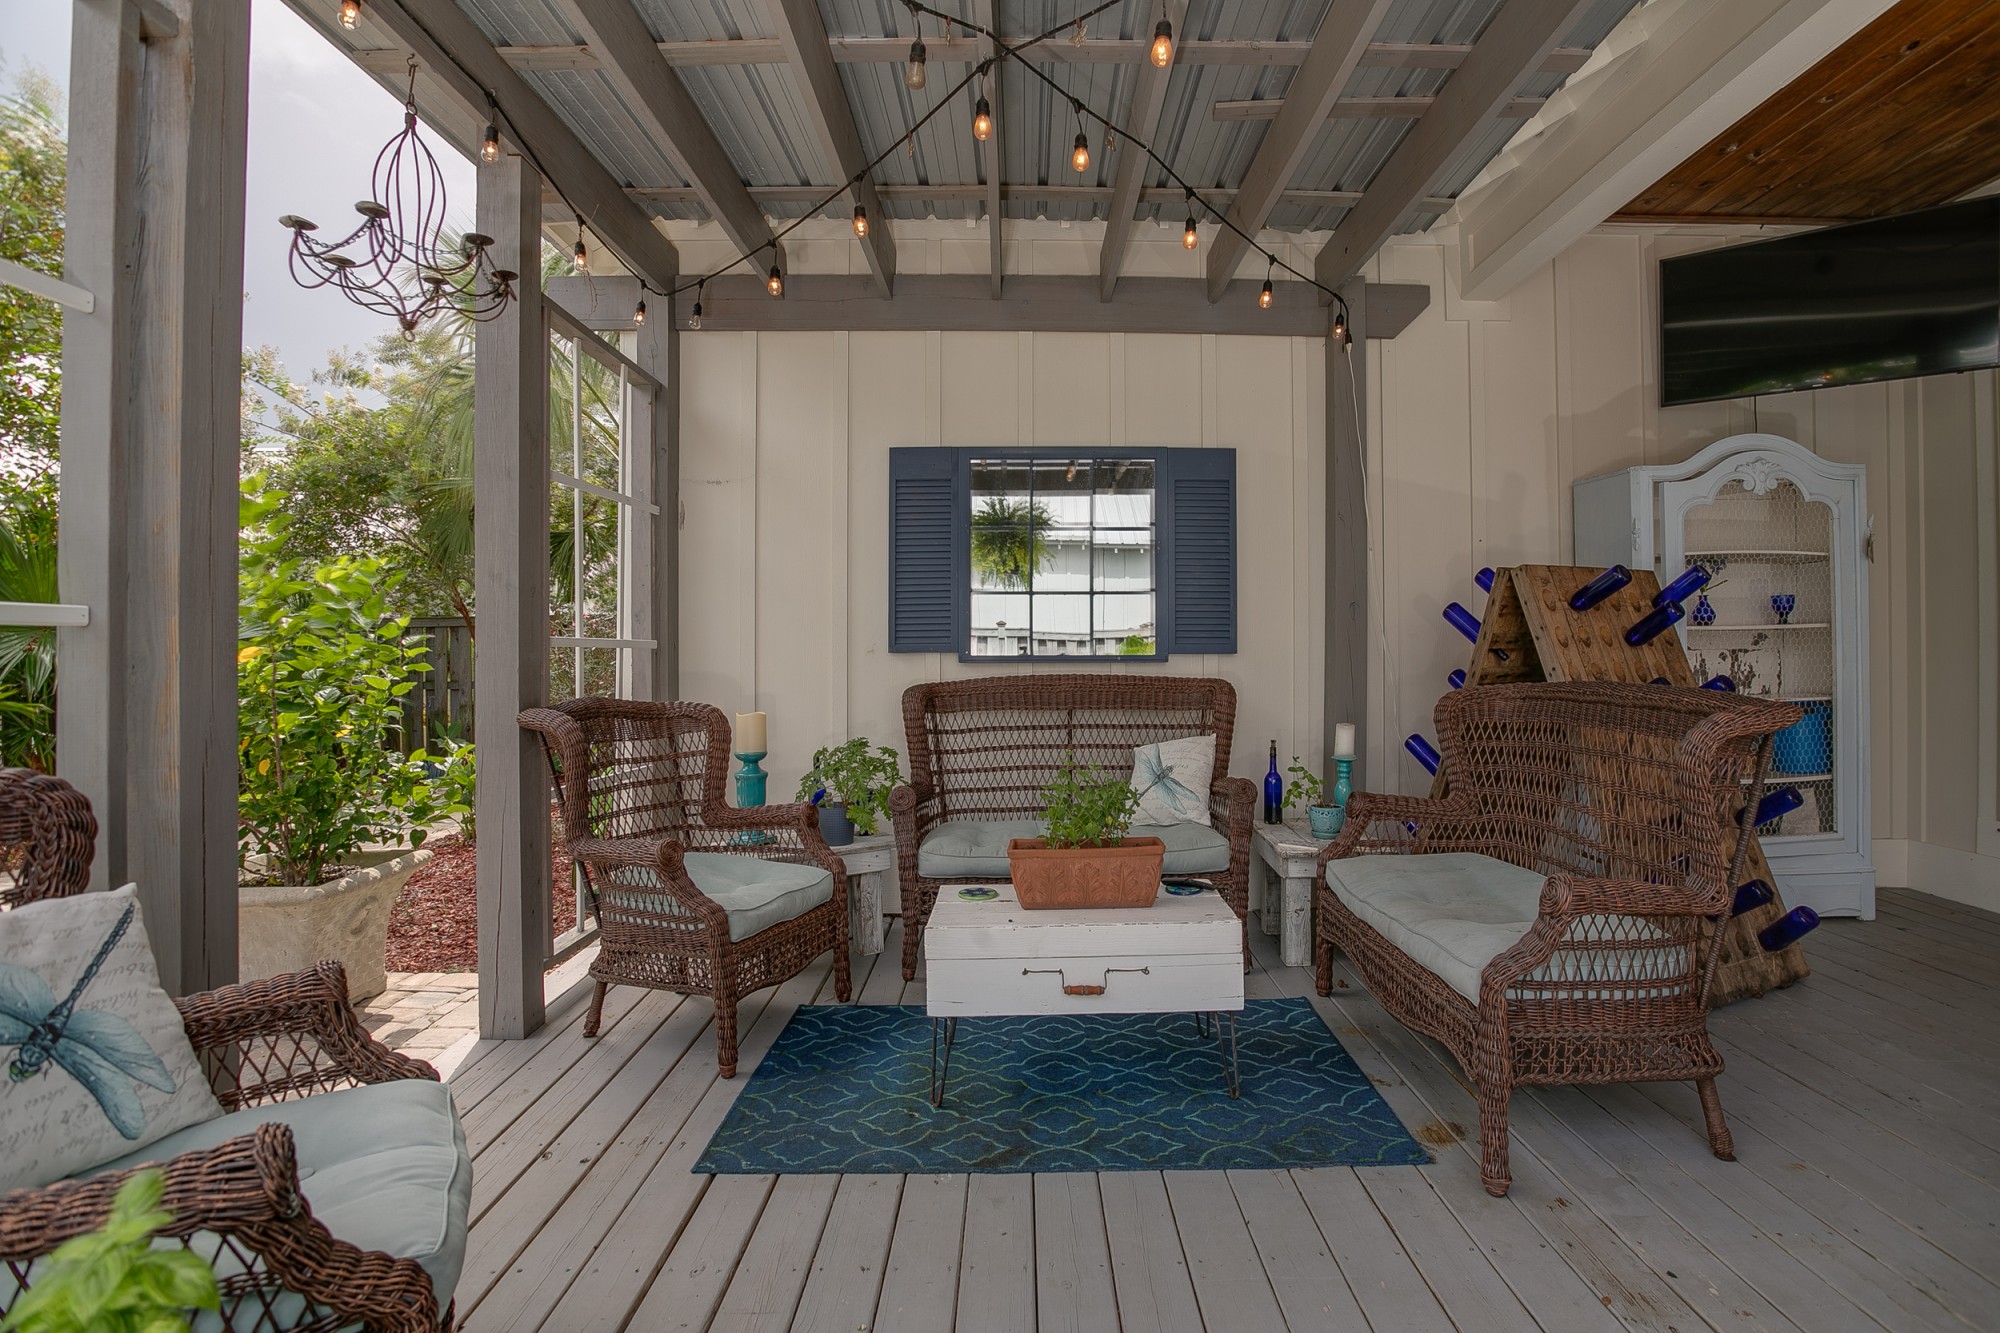 Enjoy Morning Coffee In Your Outdoor Living Room